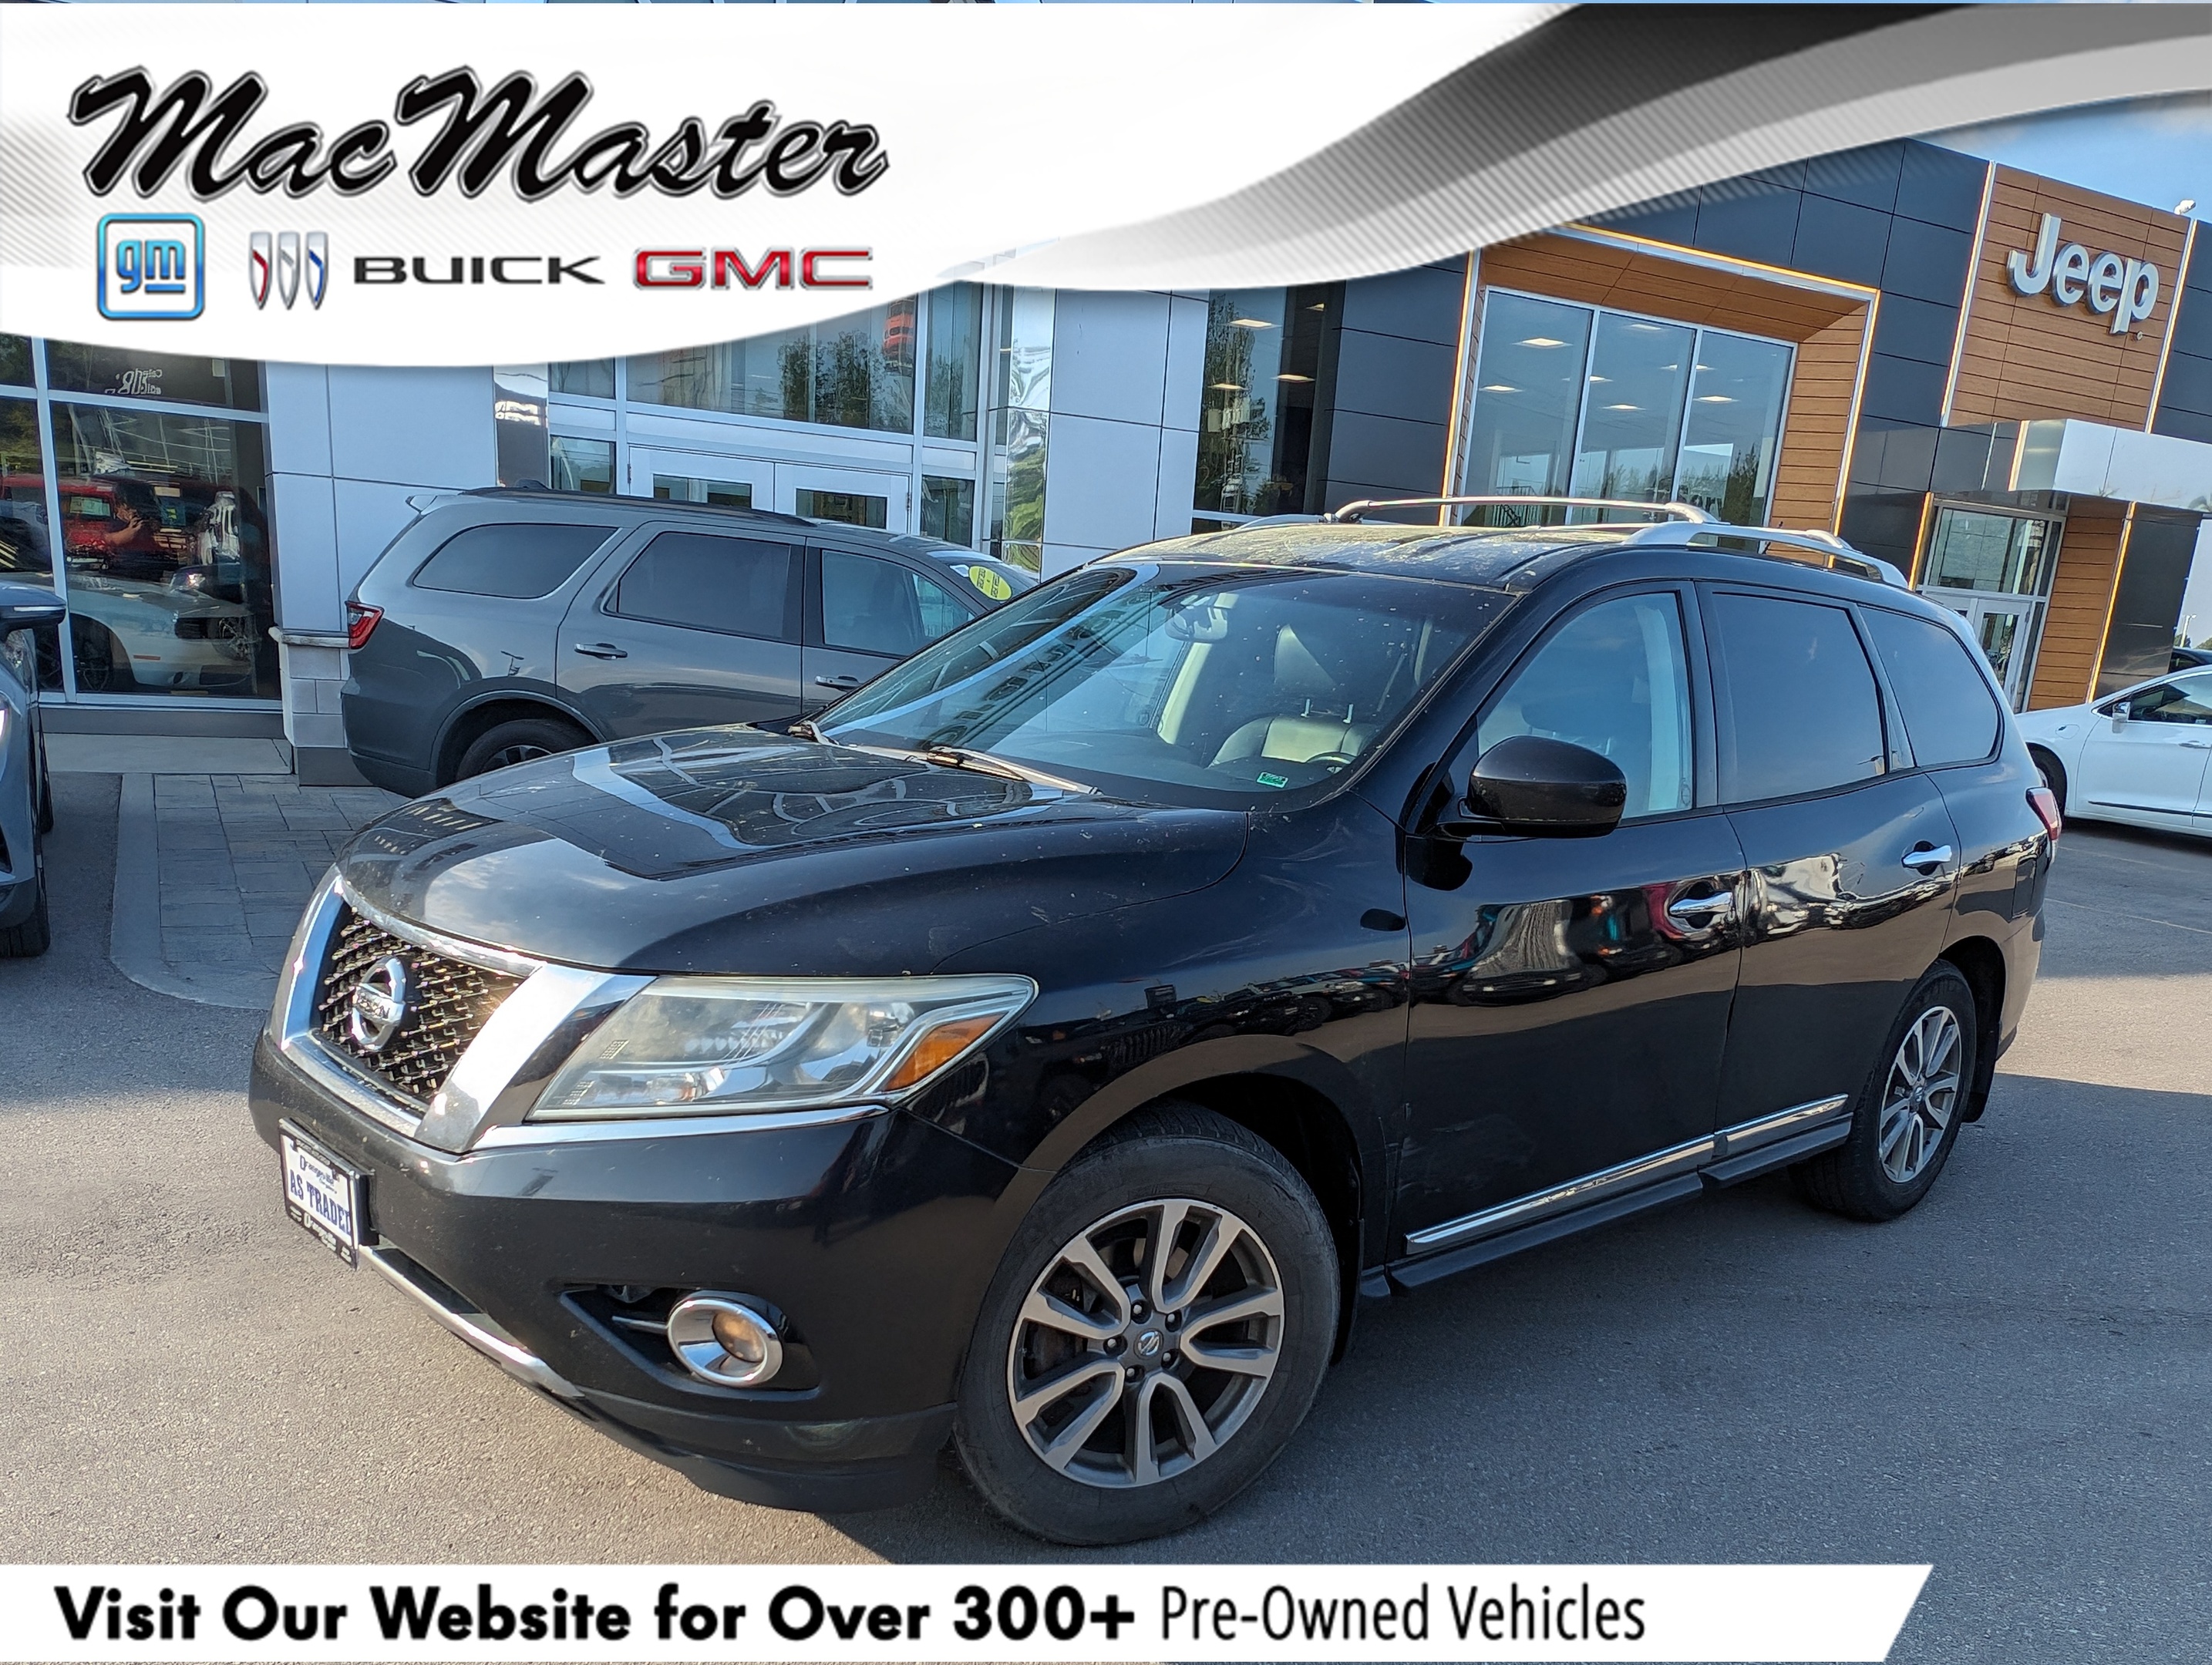 2014 Nissan Pathfinder SL V6, CVT, FWD, HEATED LEATHER, AS-TRADED